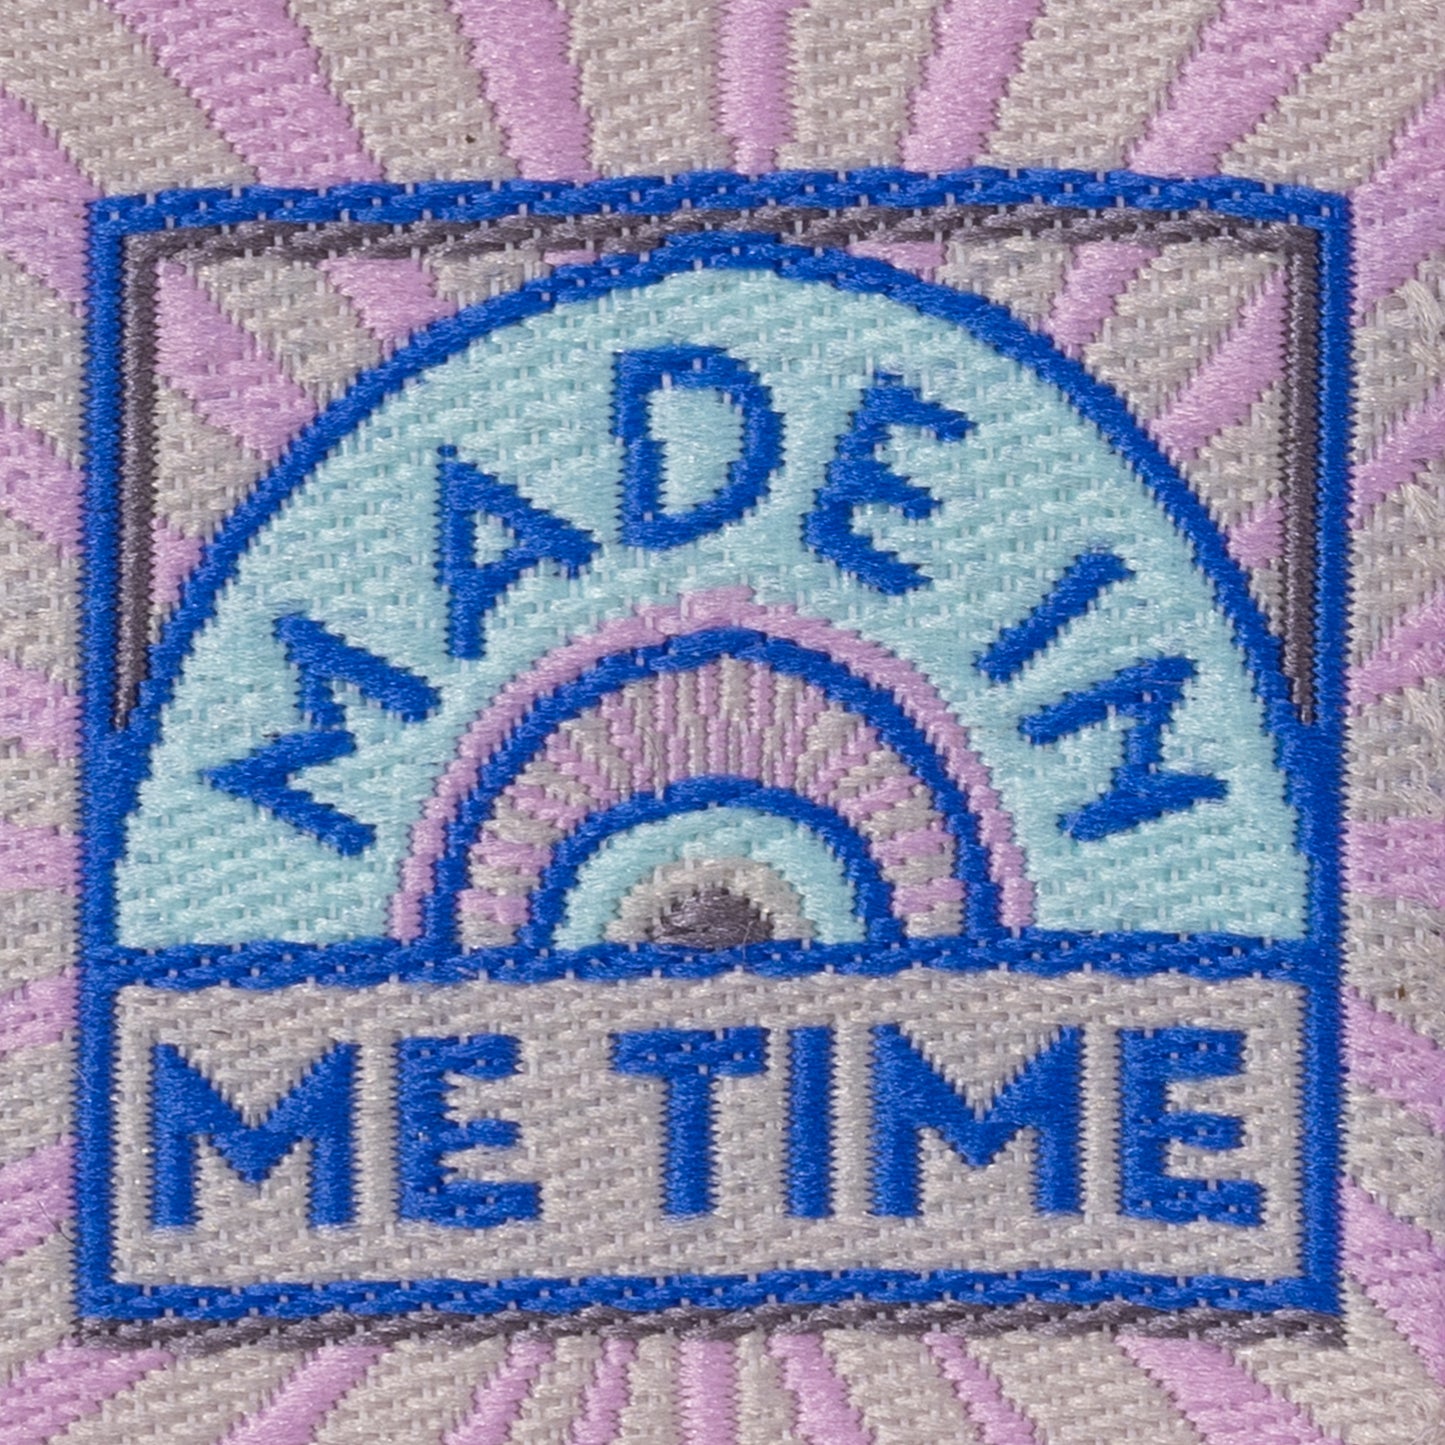 MADE IN ME TIME